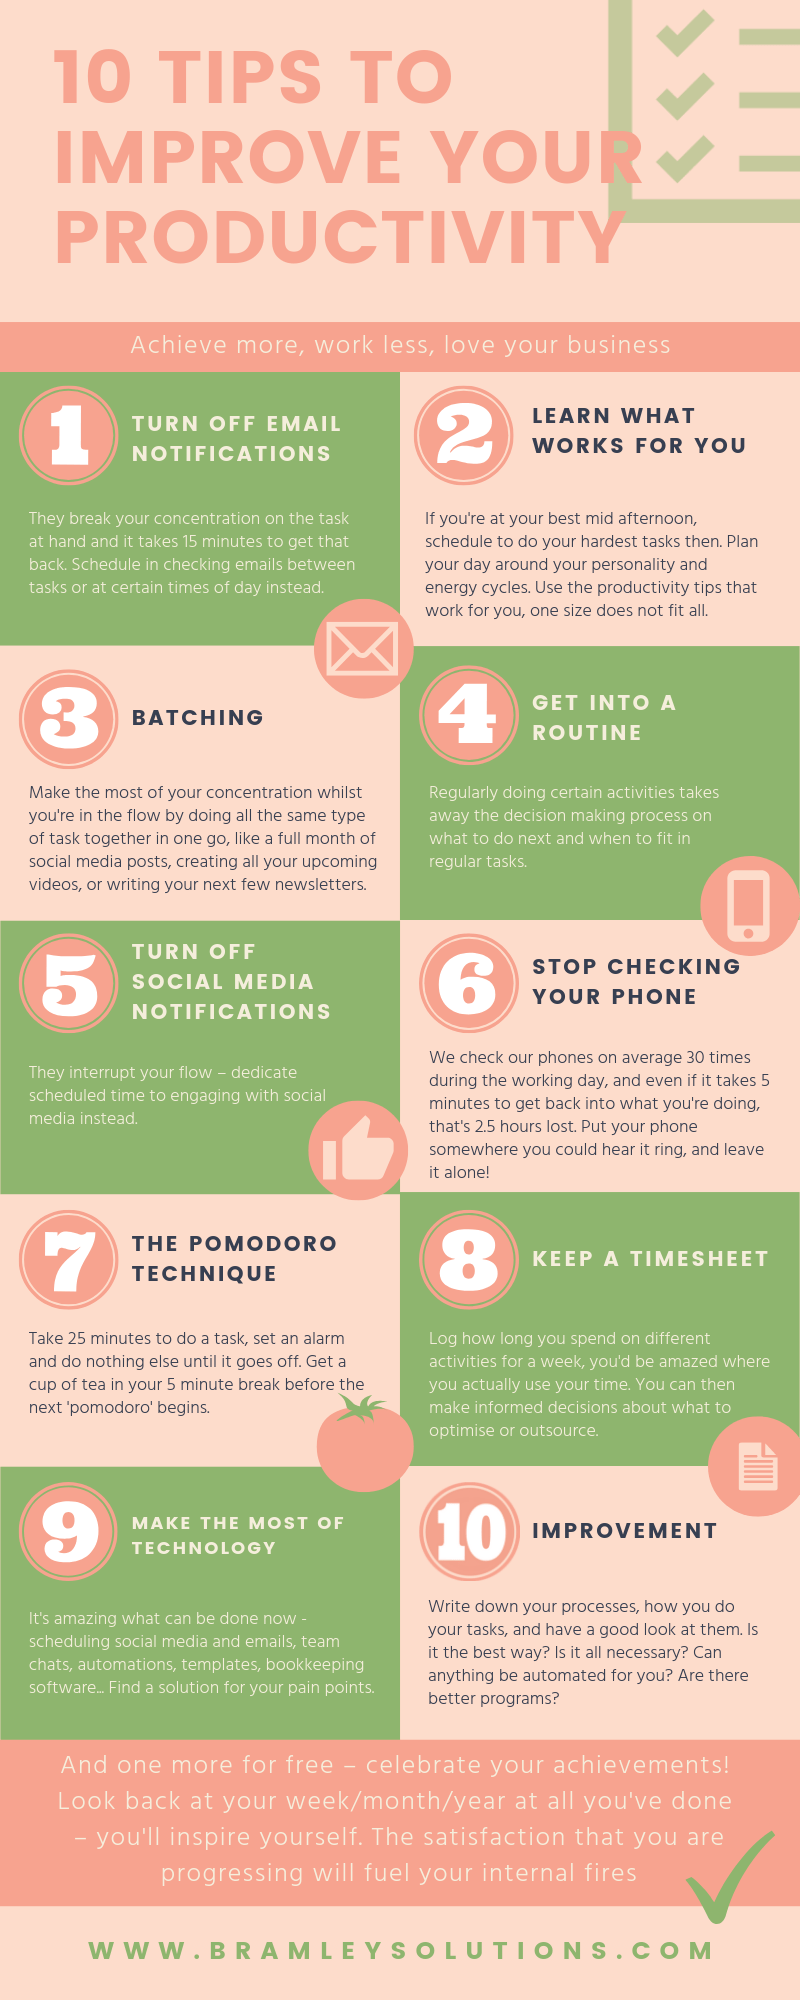 10 tips to improve productivity, infographic, turn off email notifications, batching, turn off social media notifications, stop checking your phone, the pomodoro technique, keep a timesheet, make the most of technology, process improvement